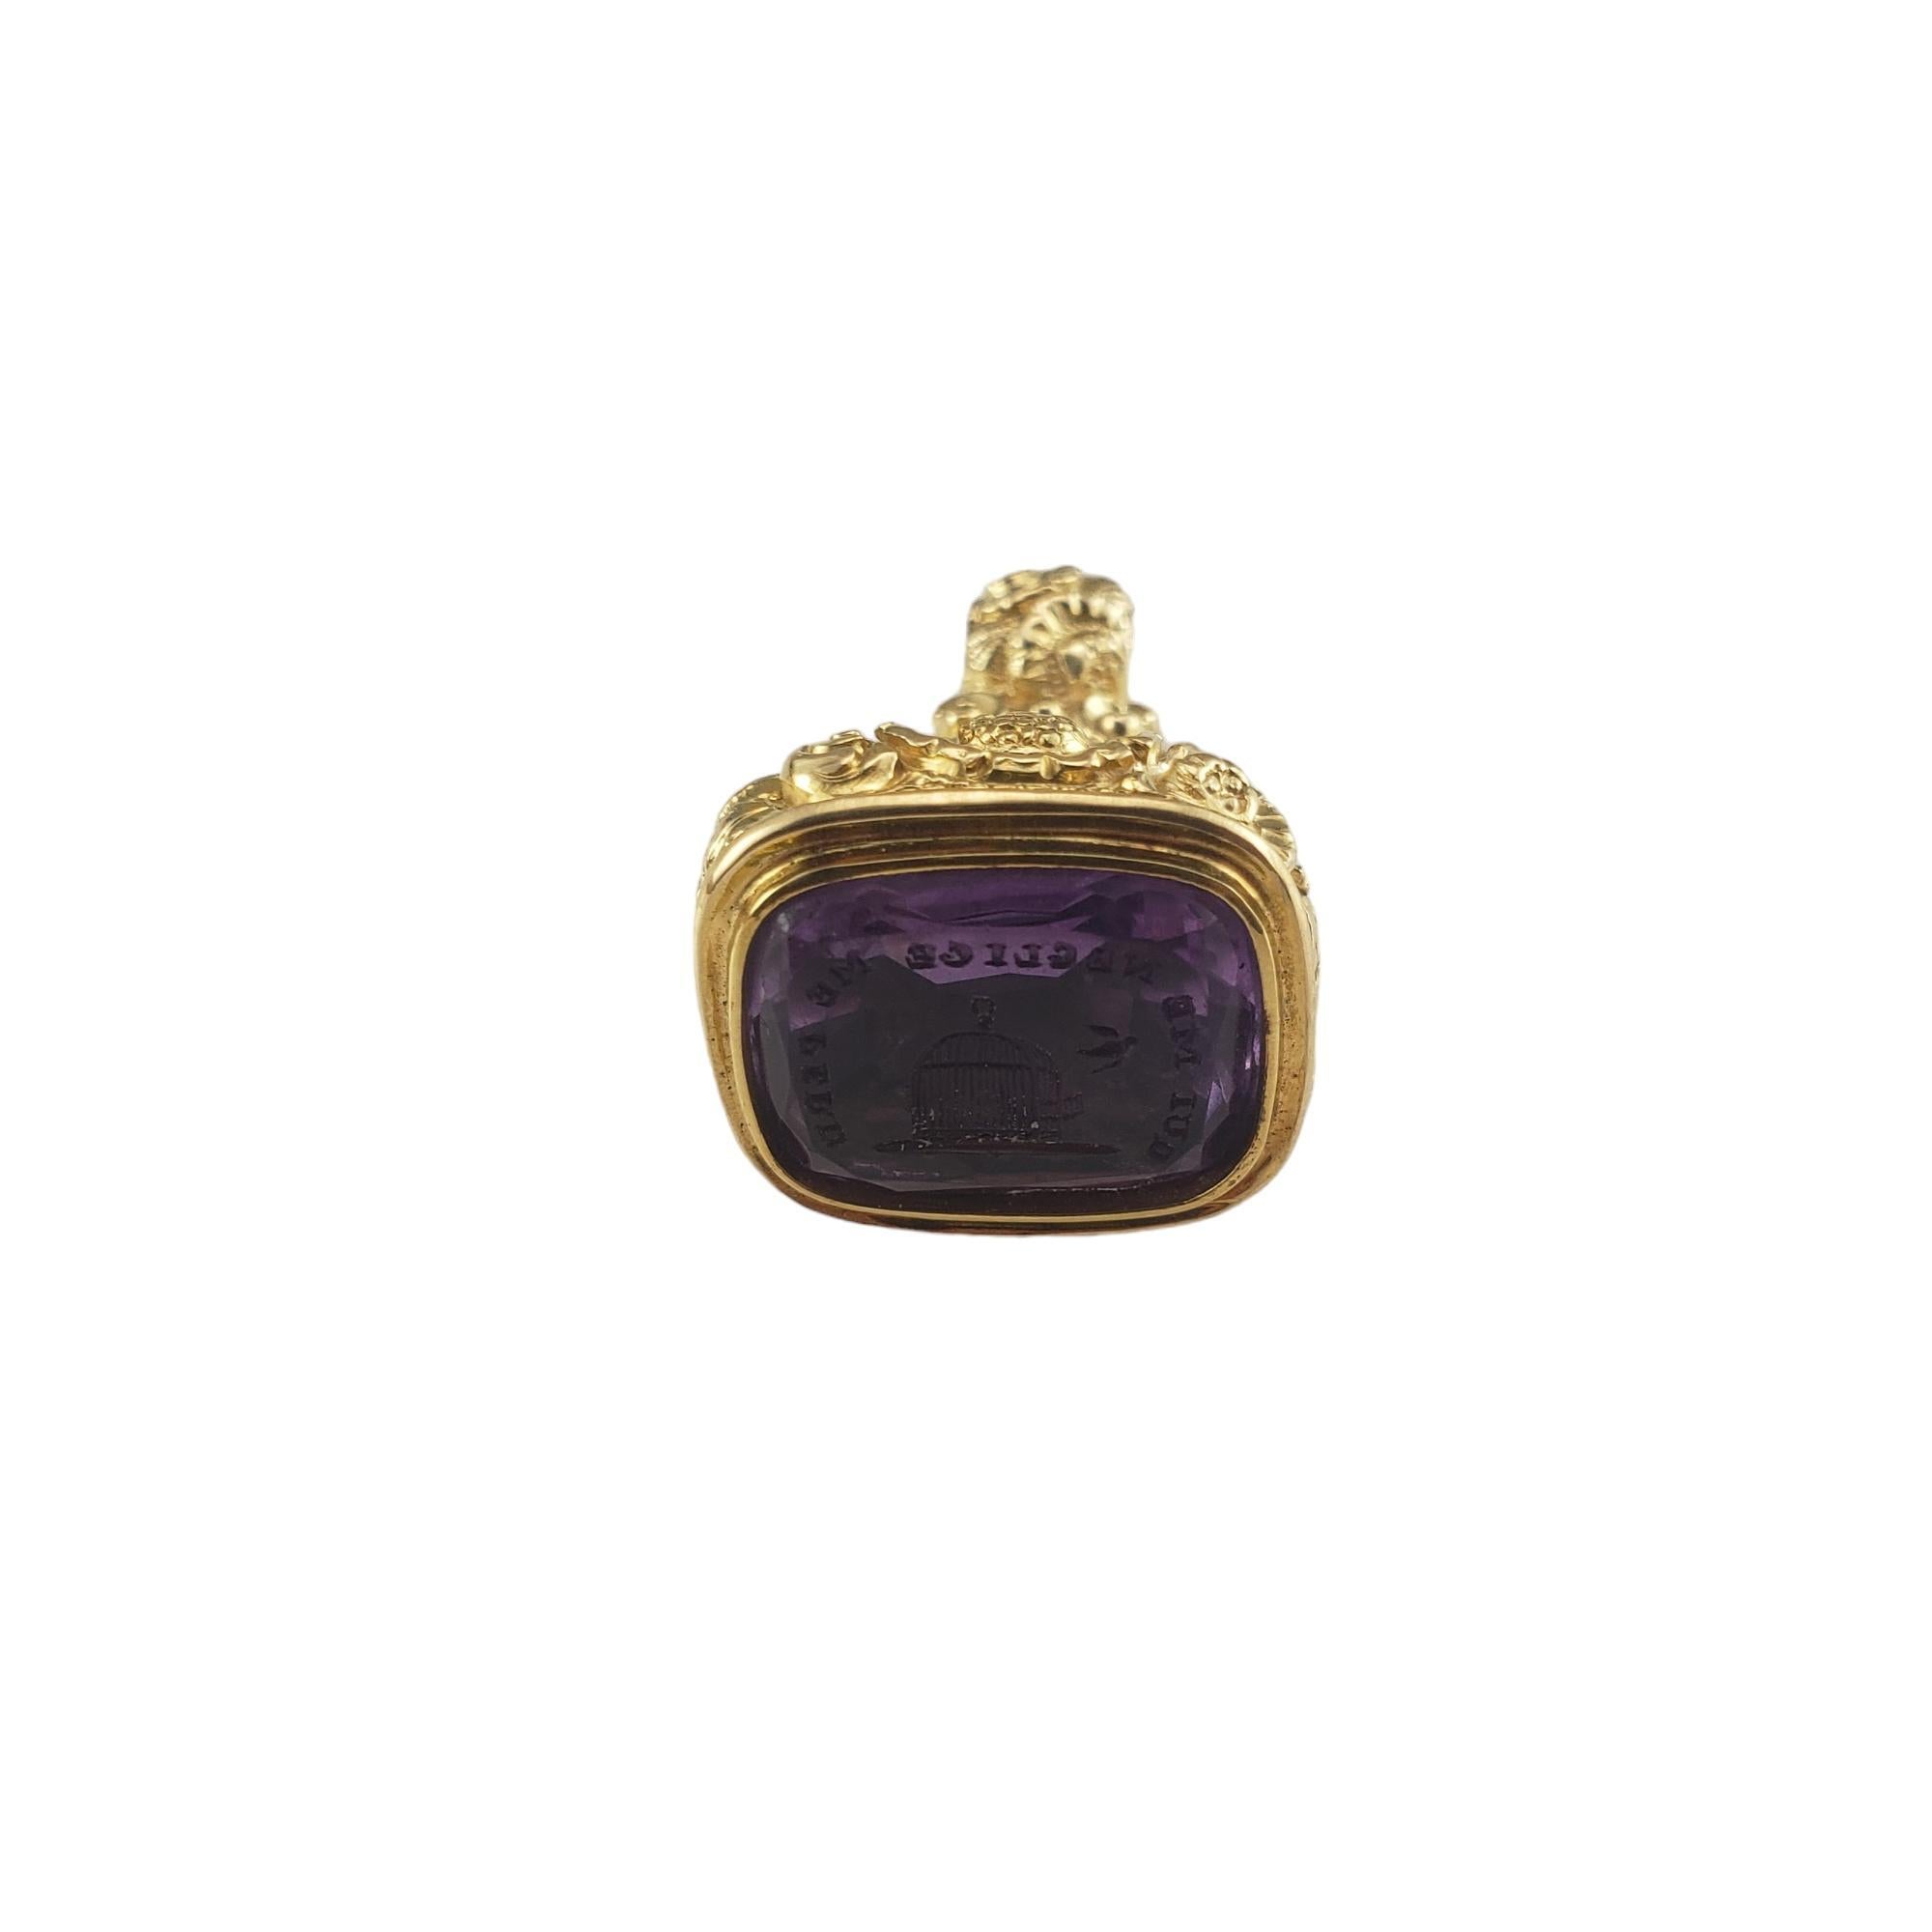 Vintage 14K Yellow Gold Amethyst Seal Fob Lab Certified-

This elegant watch fob features an amethyst intaglio Georgian seal (15 mm x 12 mm) set in beautifully detailed 14K yellow gold.

Amethyst weight: 9.78 ct.

Size:  29 mm x 18 mm

Tested 14K